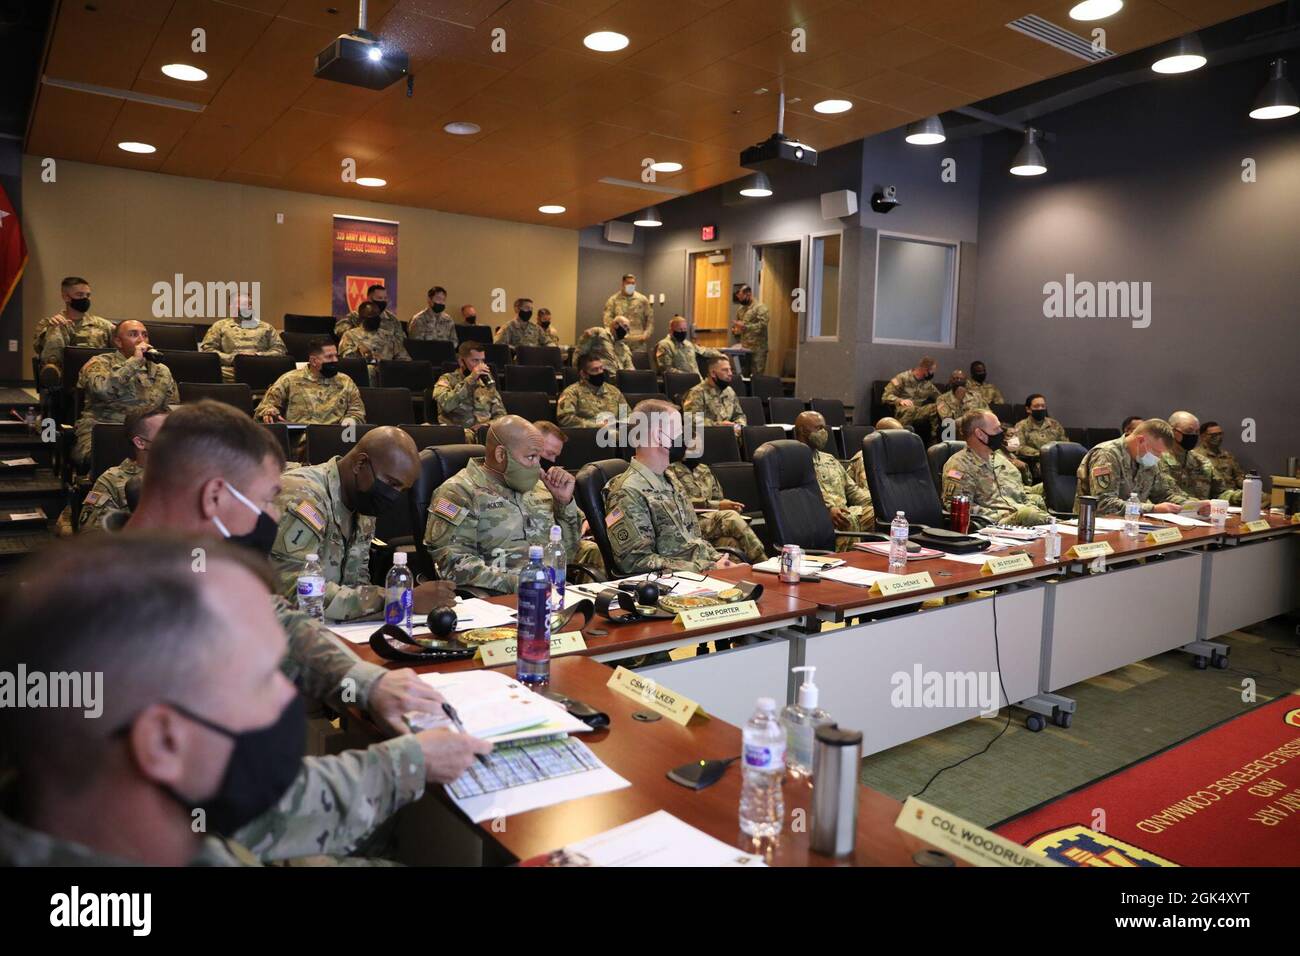 FORT BLISS, Texas – Key leaders from across 32d Air and Missile Defense Command receive a brief during a Quarterly Theater Review at the Mission Training Center on Fort Bliss, August 3-5, 2021. Stock Photo